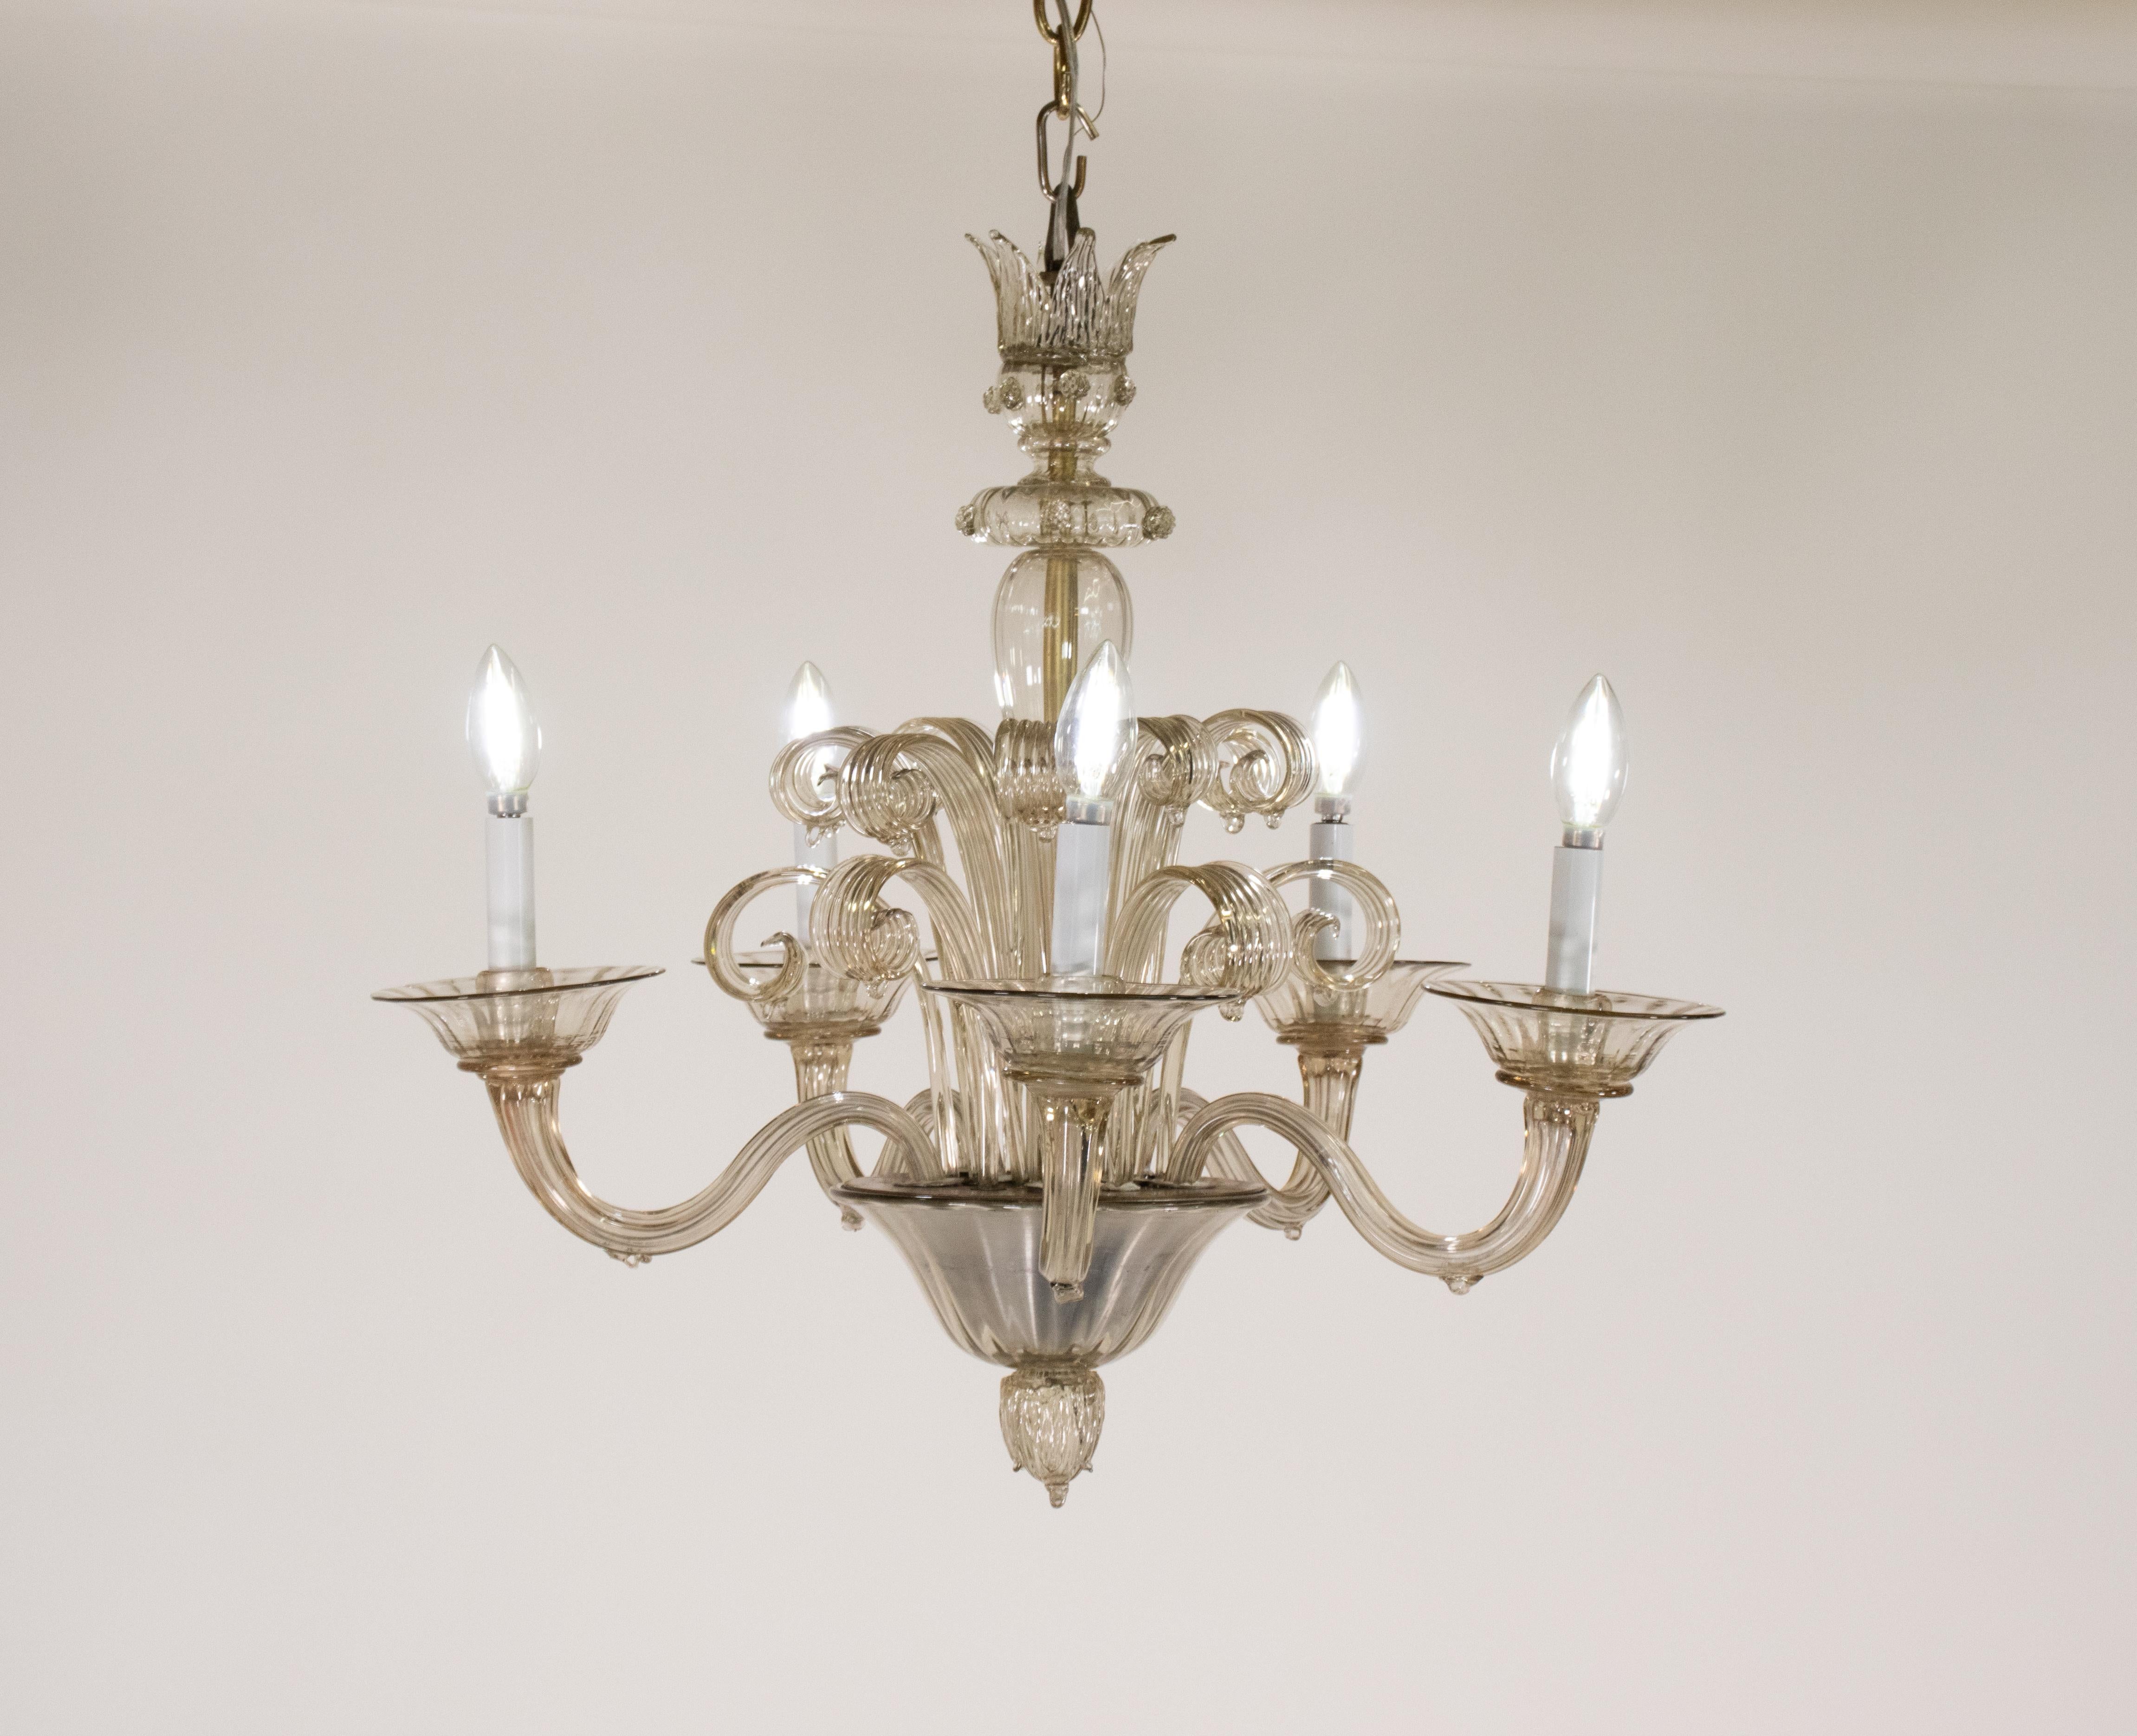 For centuries, Murano chandeliers have captivated designers, celebrities, and discerning homeowners. Each chandelier is handcrafted through intricate glassblowing techniques and the skilled blending of mineral oxides, creating the soft, distinctive